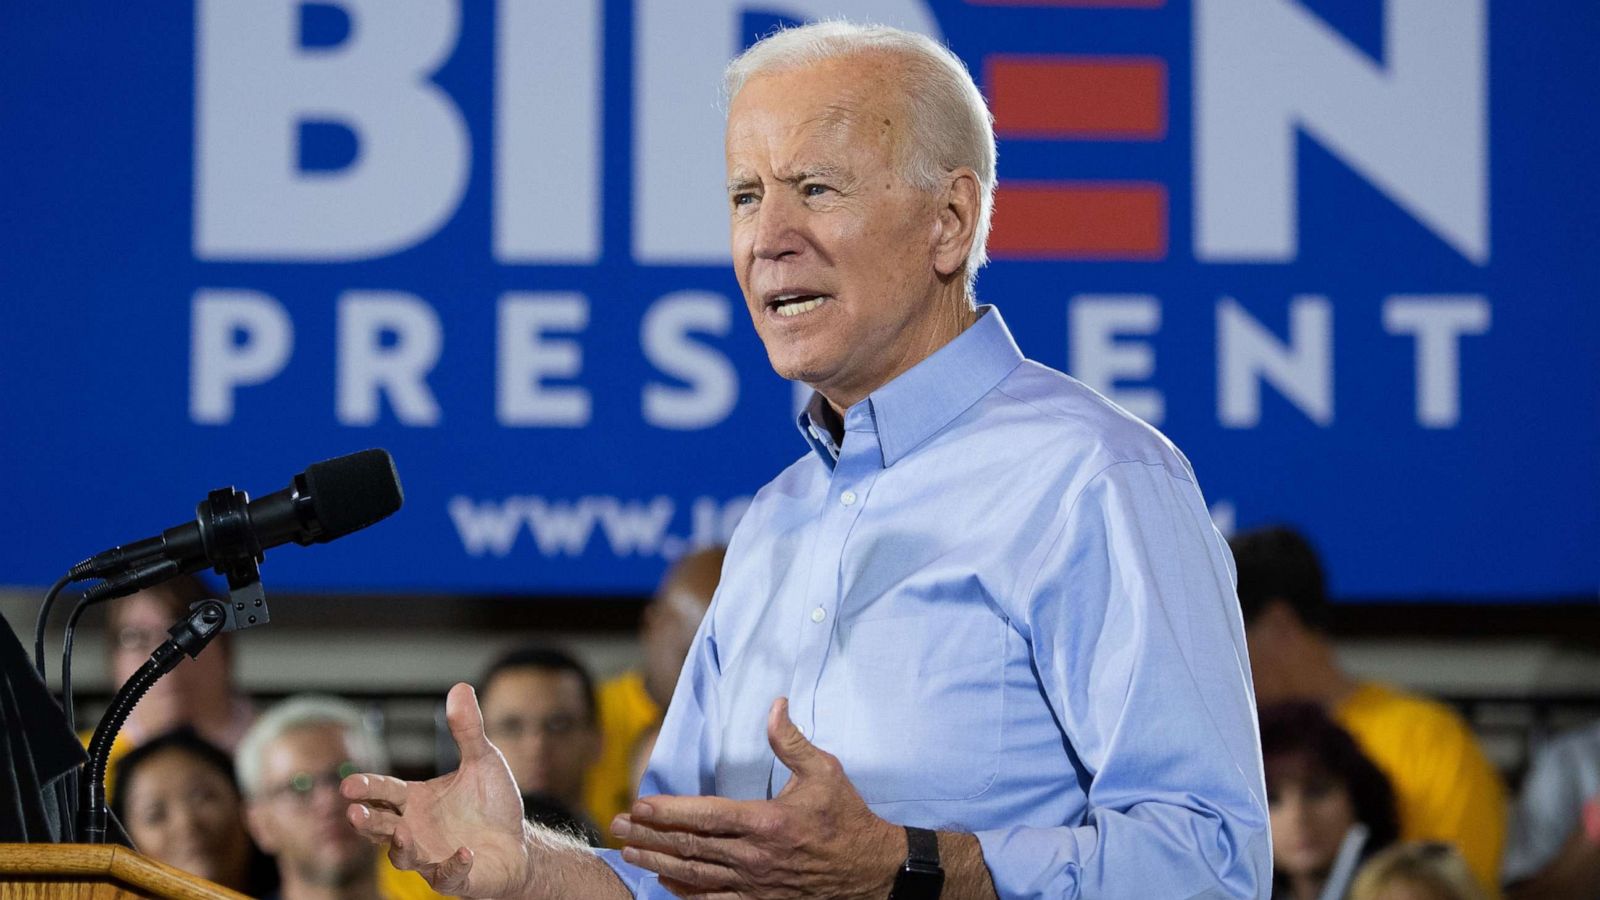 Biden Announces Running For Re-Election In 2024